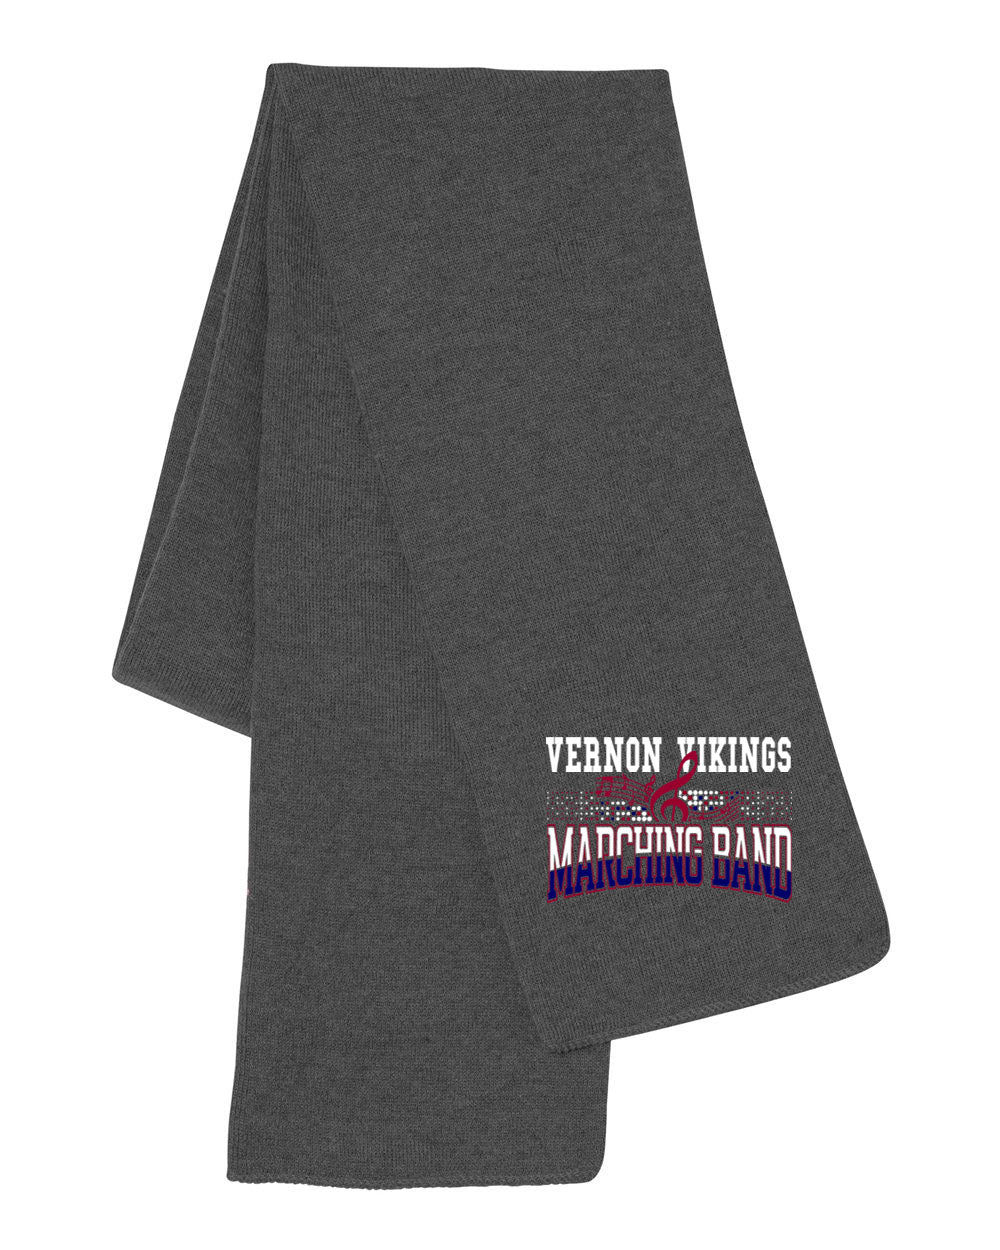 Vernon Marching Band design 6 Scarf